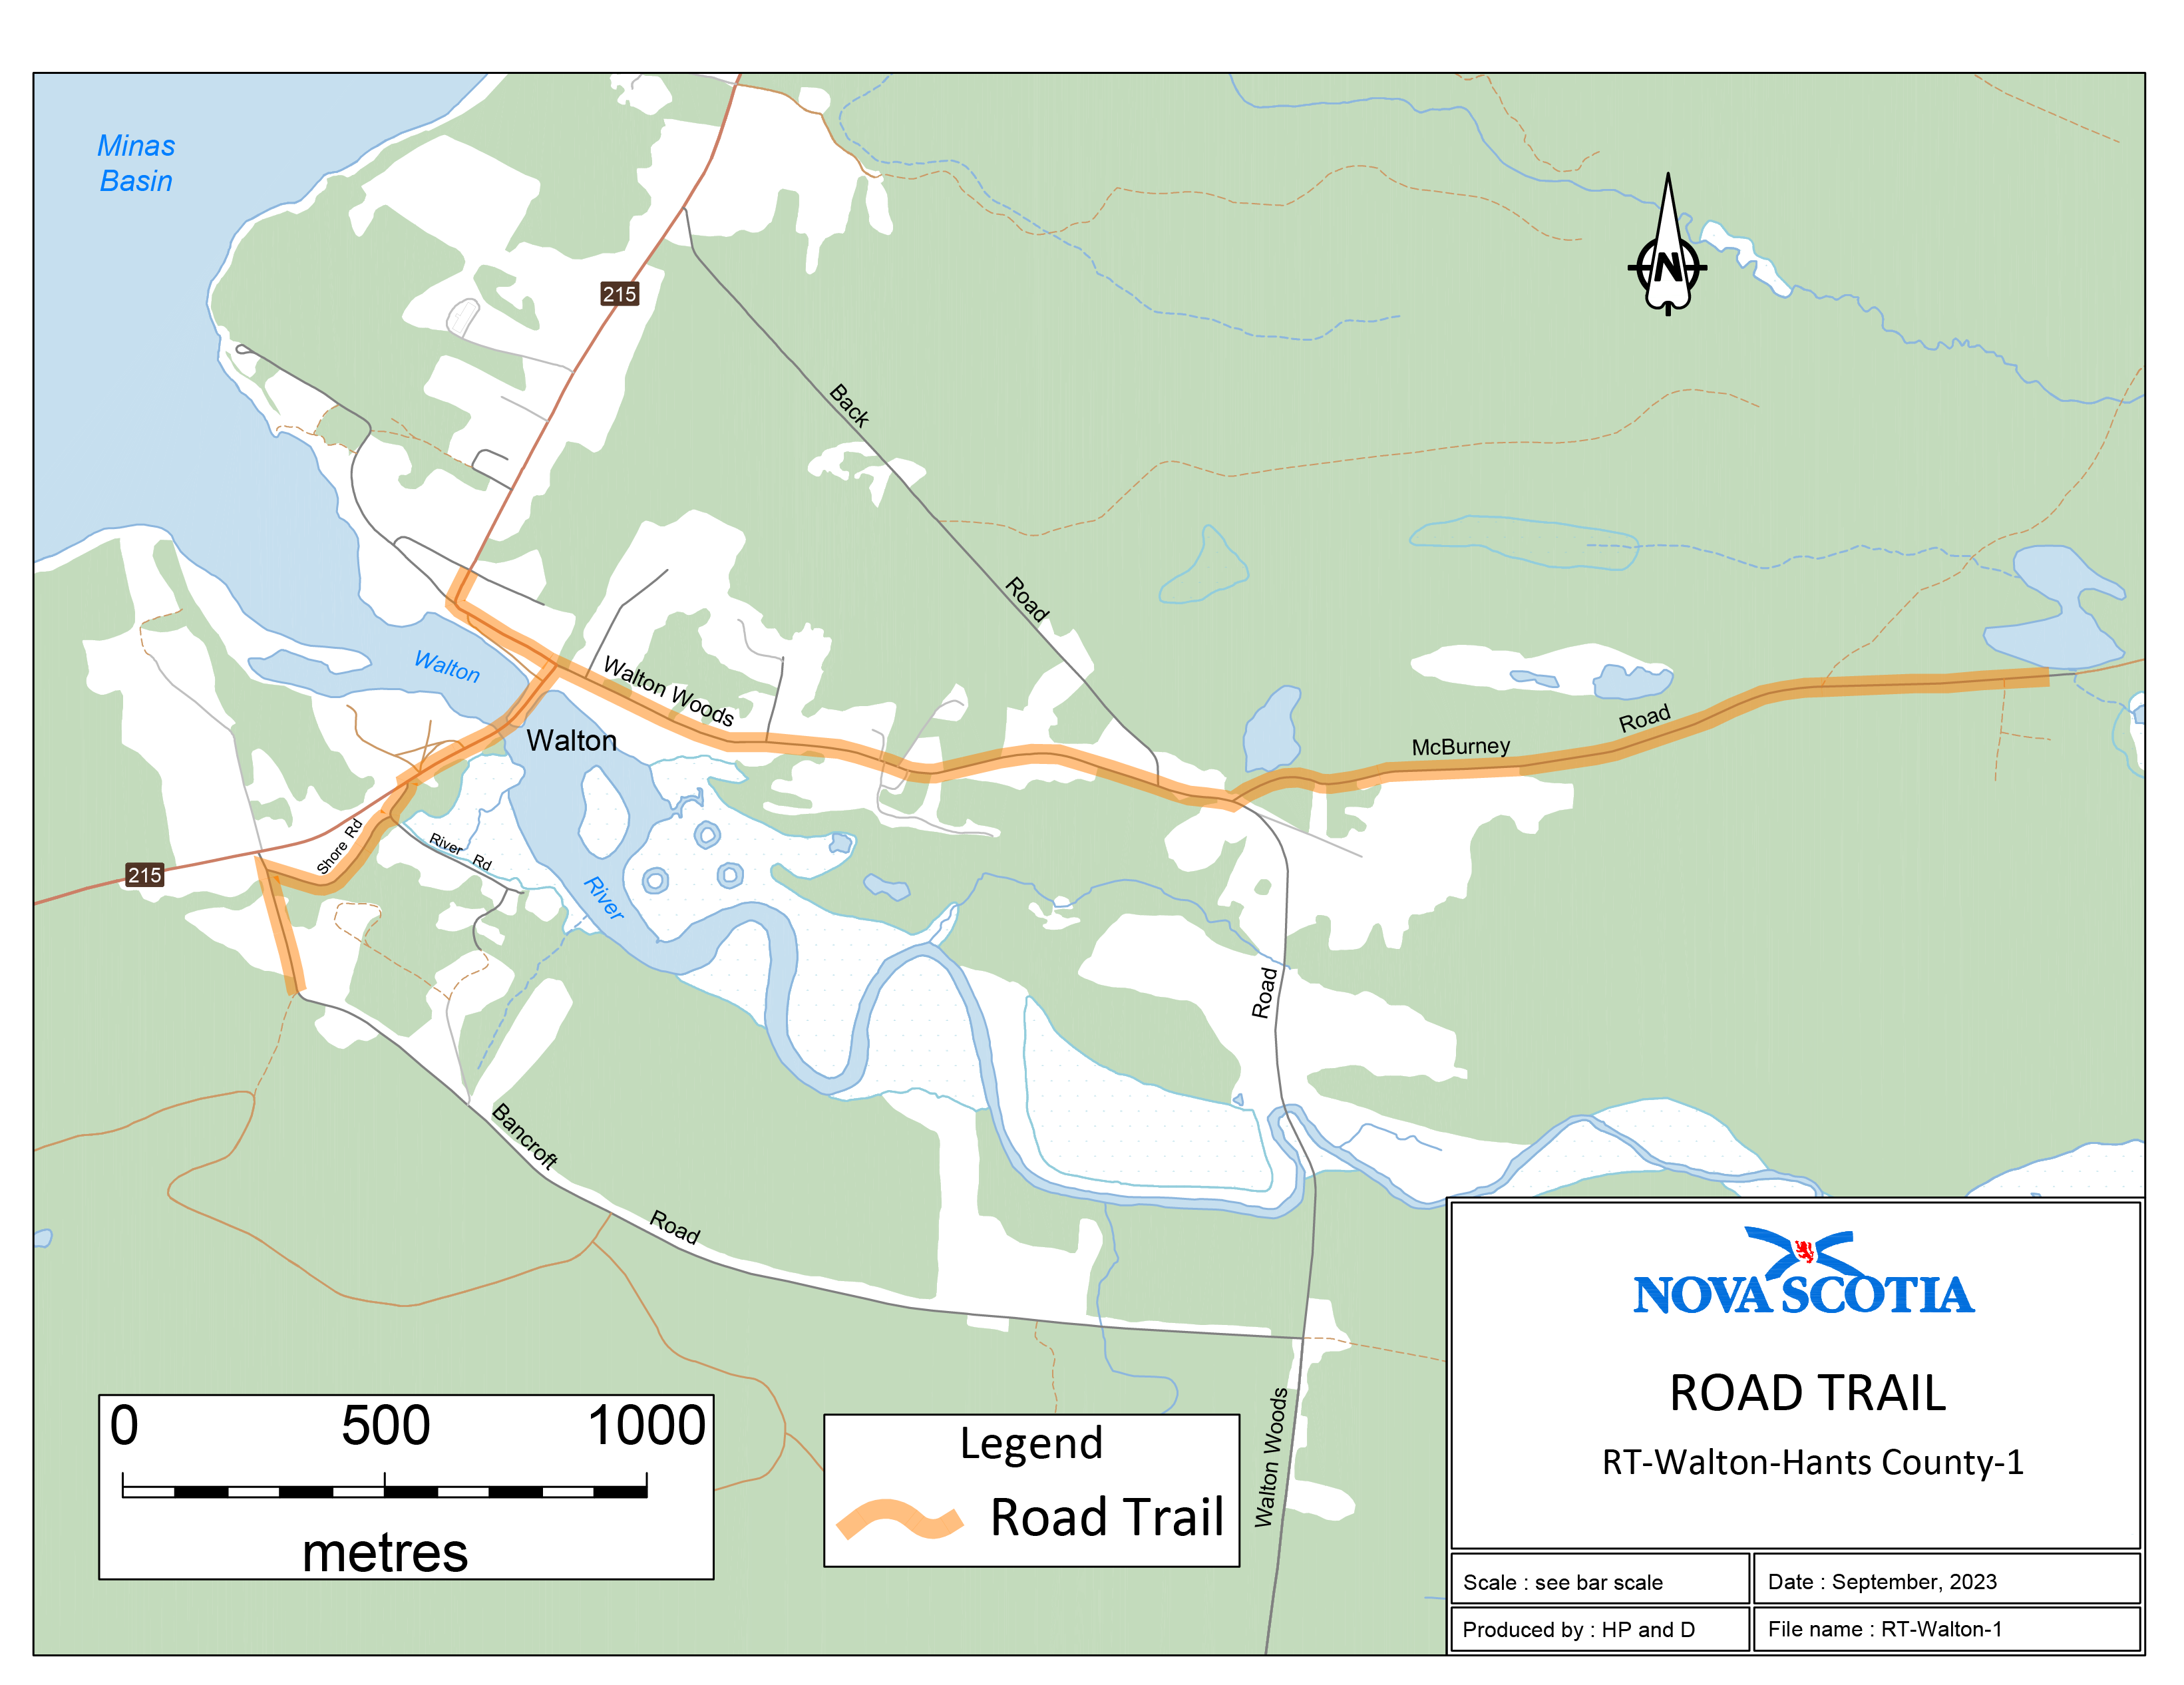 Graphic showing map of the Walton Road Trail